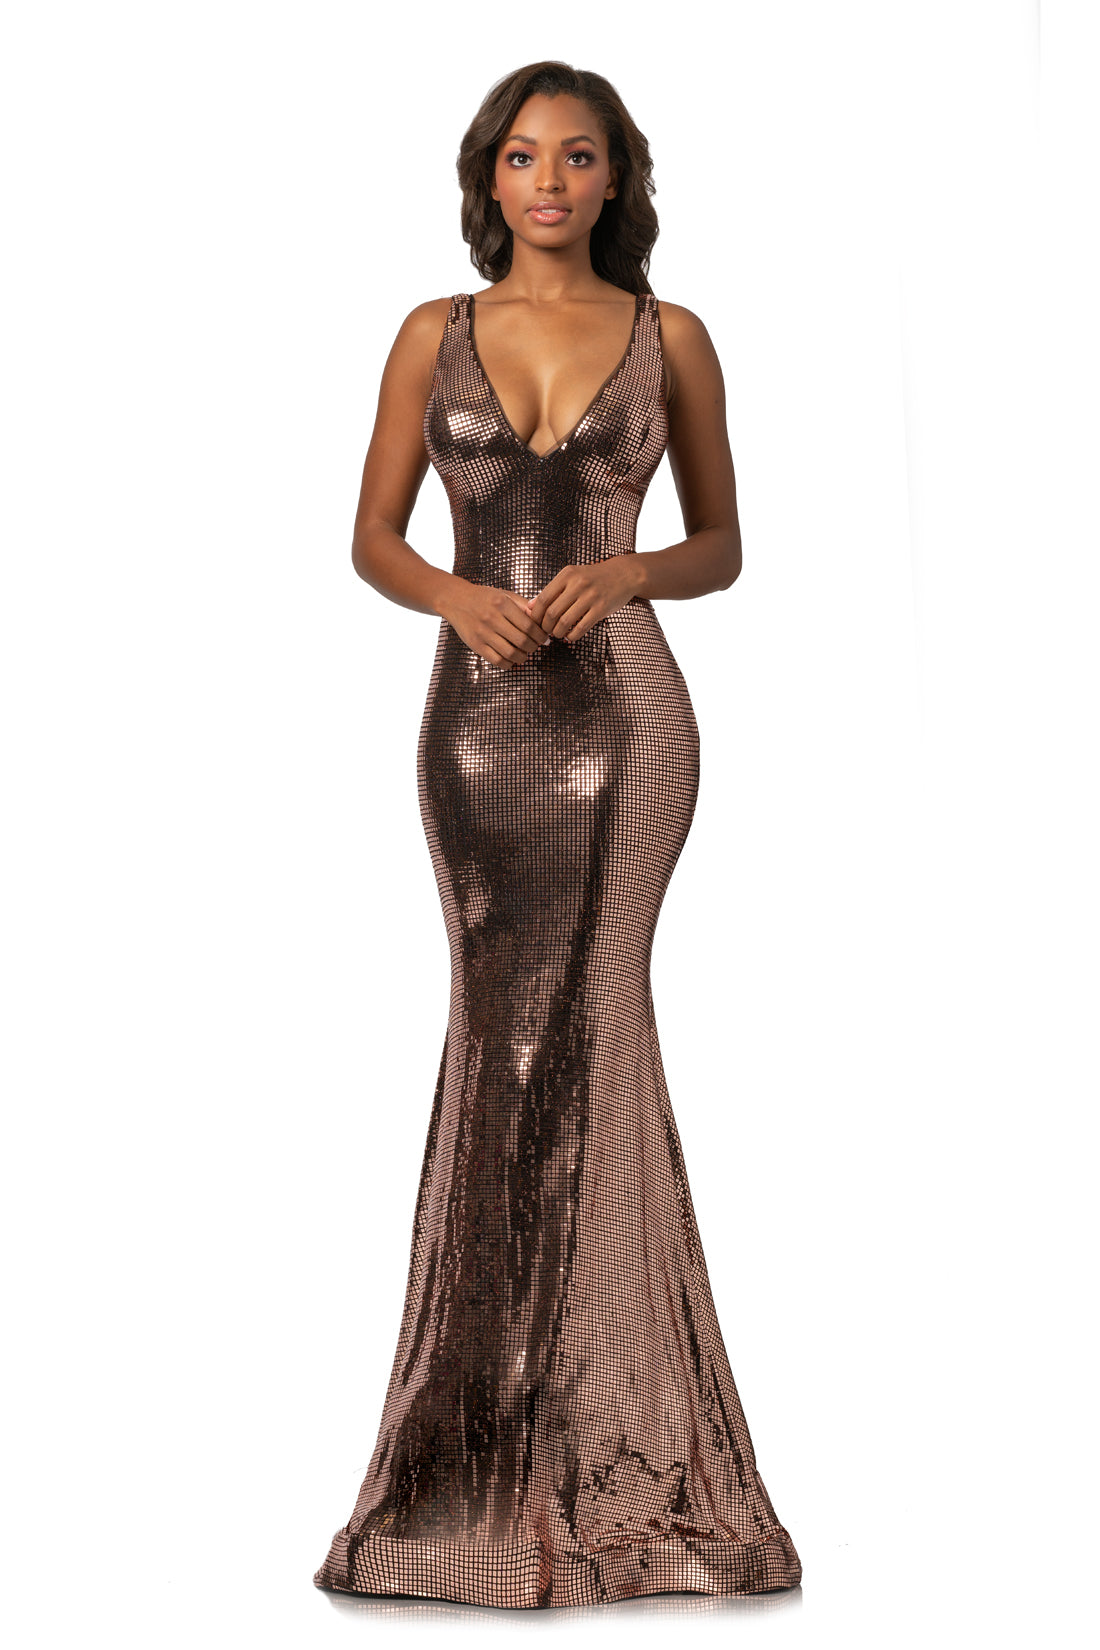 Johnathan Kayne 2044 is a long mermaid Prom Dress, Pageant Gown & Formal Evening Wear. This Fun Gown Features a Unique Metallic Sequin Stretch Jersey! Mermaid Silhouette with a Deep V Neckline as well as an Open V Back. Lush Trumpet skirt features a beautiful sweeping train. Very Unique & Fun style! 